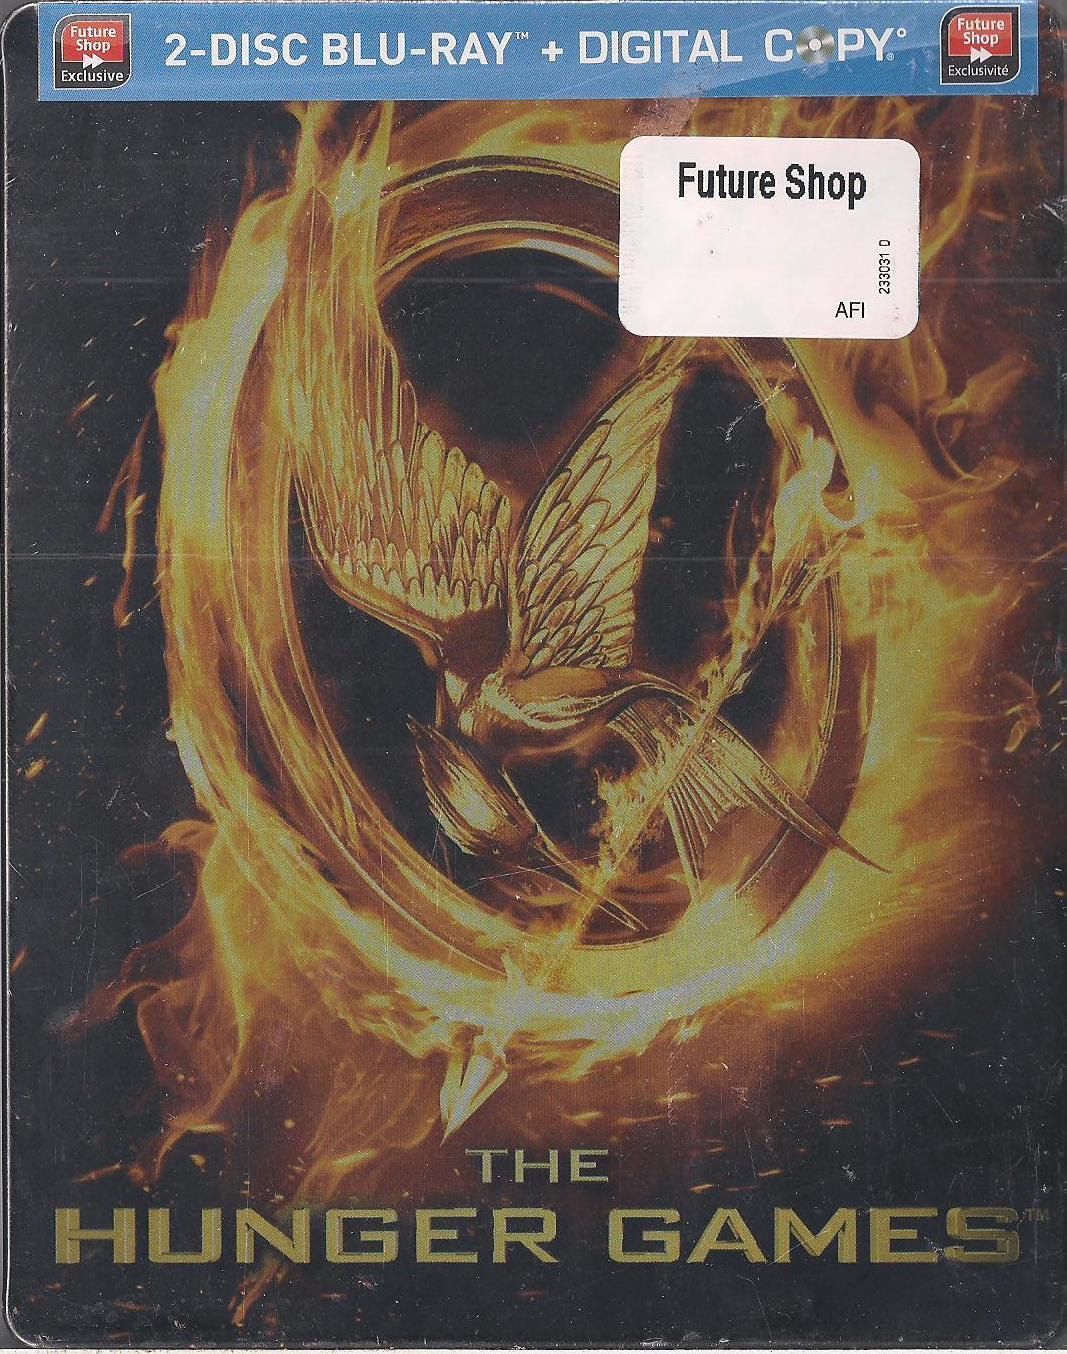 Primary image for The Hunger Games Mockingjay Edition Future Shop Steelbook 2 Disc Blu-Ray + Digit